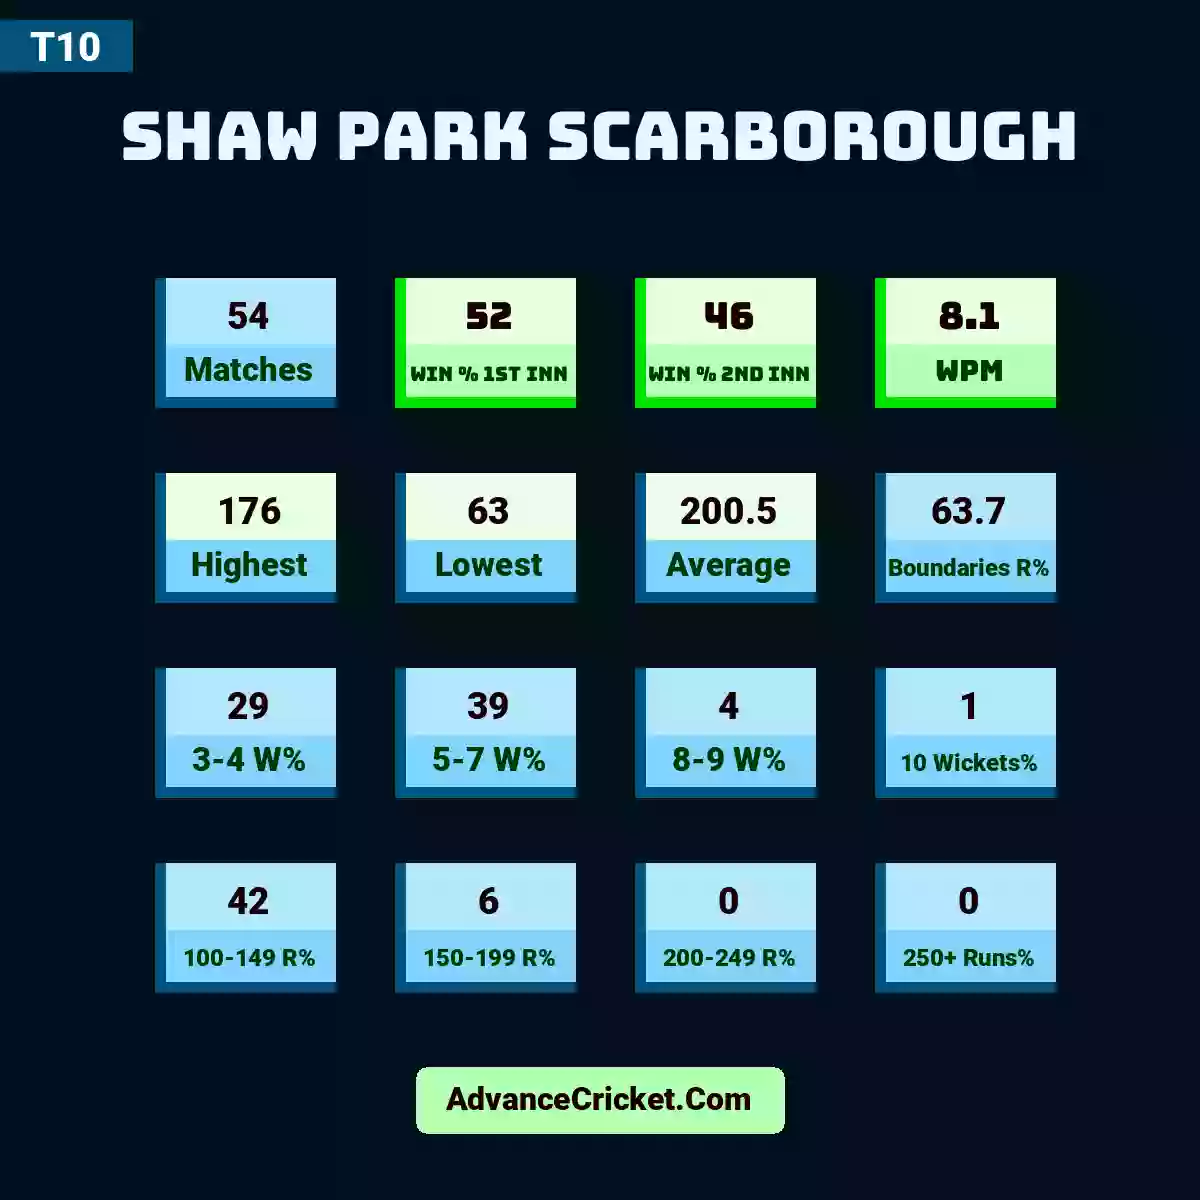 Image showing Shaw Park Scarborough T10 with Matches: 54, Win % 1st Inn: 52, Win % 2nd Inn: 46, WPM: 8.1, Highest: 176, Lowest: 63, Average: 200.5, Boundaries R%: 63.7, 3-4 W%: 29, 5-7 W%: 39, 8-9 W%: 4, 10 Wickets%: 1, 100-149 R%: 42, 150-199 R%: 6, 200-249 R%: 0, 250+ Runs%: 0.